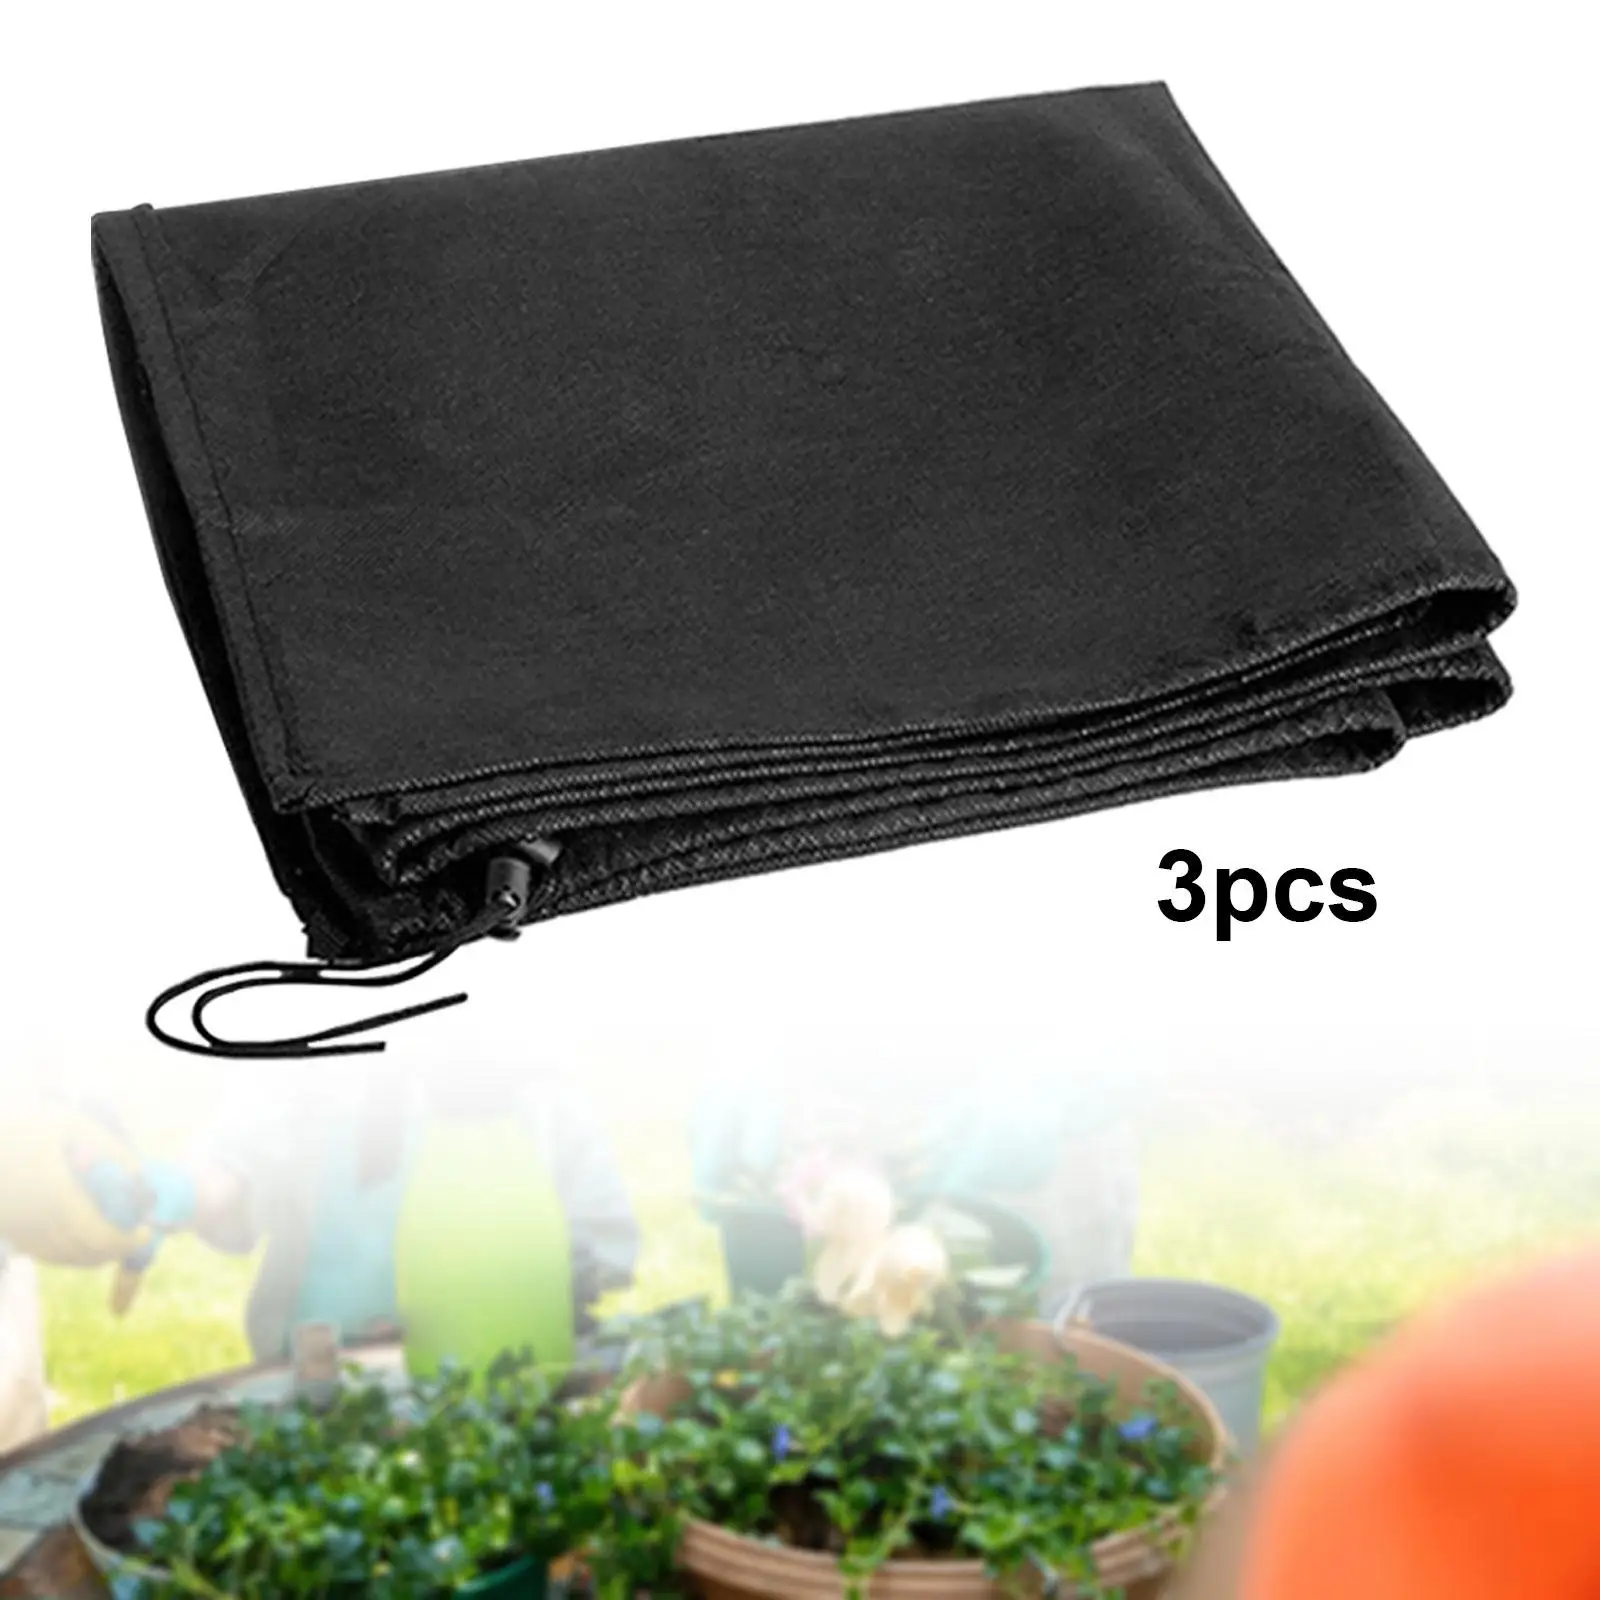 

3x City Pickers Replacement Covers Horticultural Accessories Black for Garden Mulch Gardening Tools Easy to Store 20"x24"